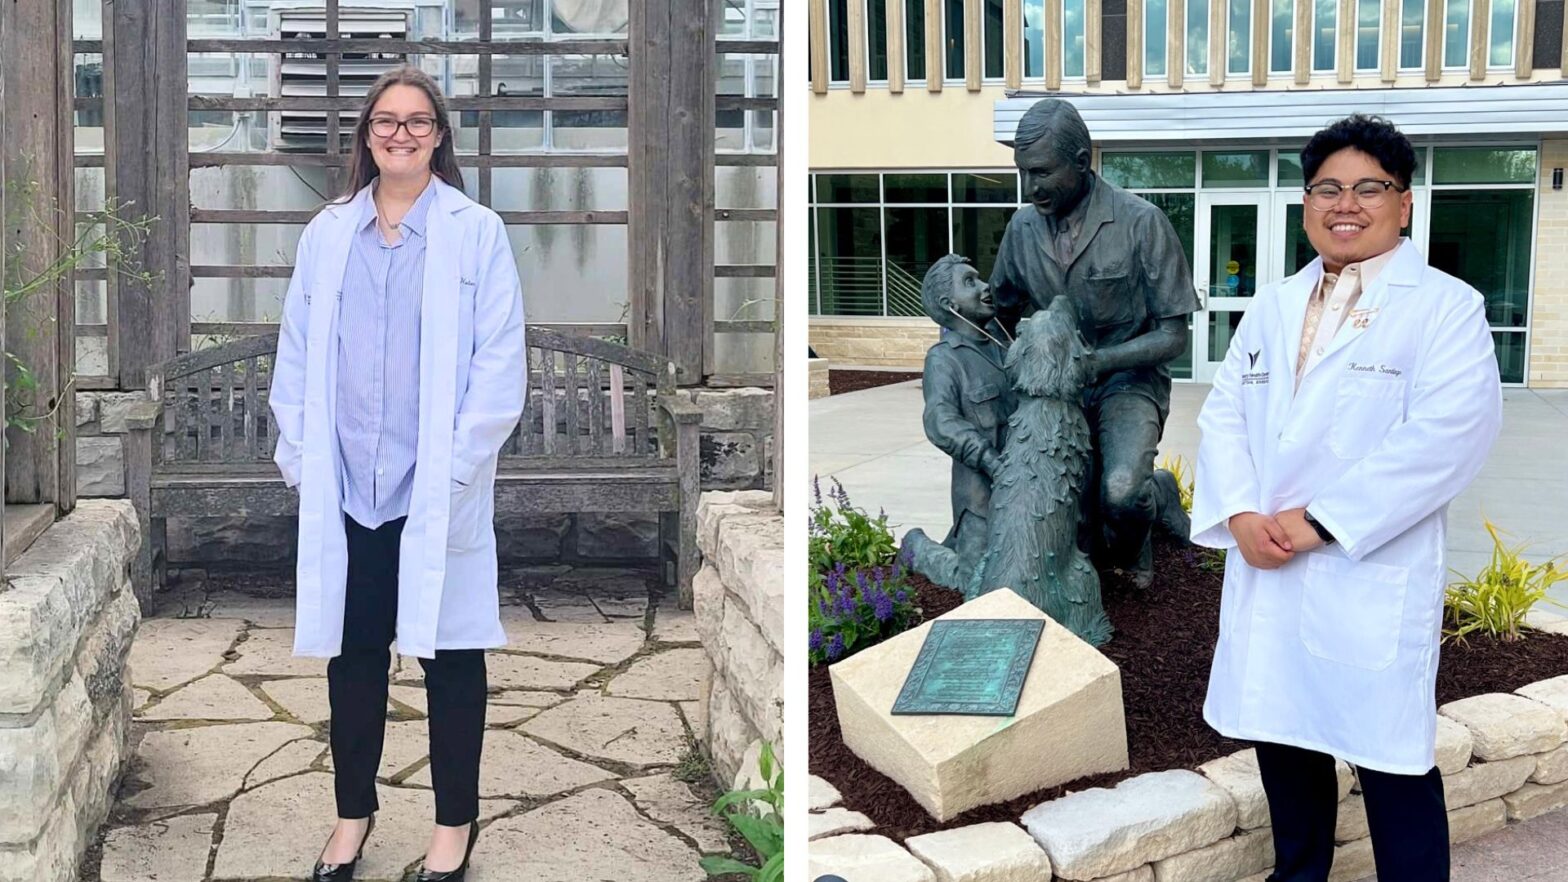 (From left to right) Hanah Huber and Kenneth Santiago are Newman University graduates and soon-to-be graduates of the Kansas State University veterinary program.